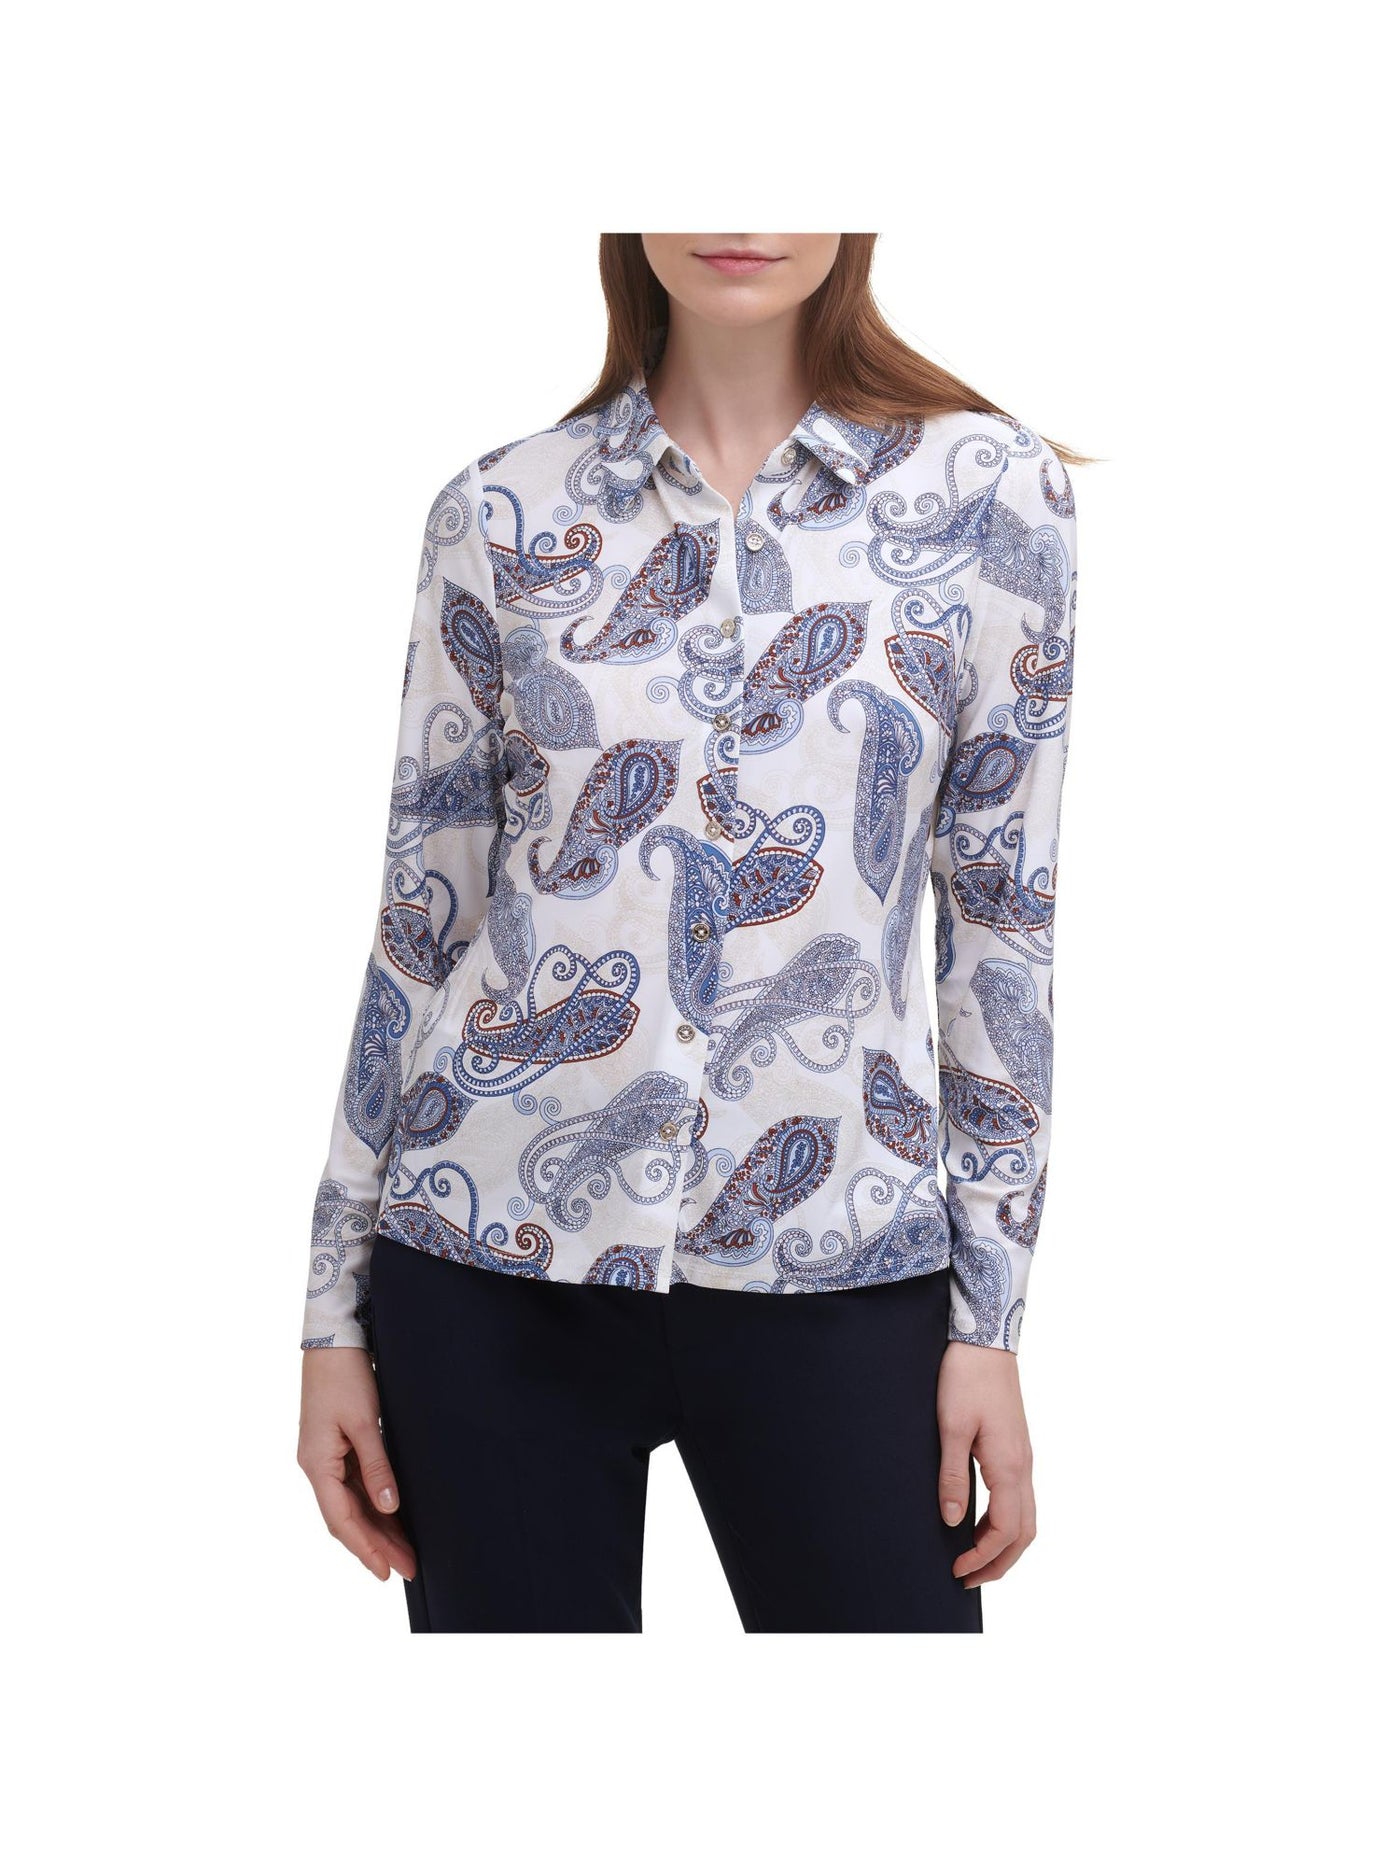 TOMMY HILFIGER Womens White Stretch Paisley Long Sleeve Point Collar Wear To Work Button Up Top XS